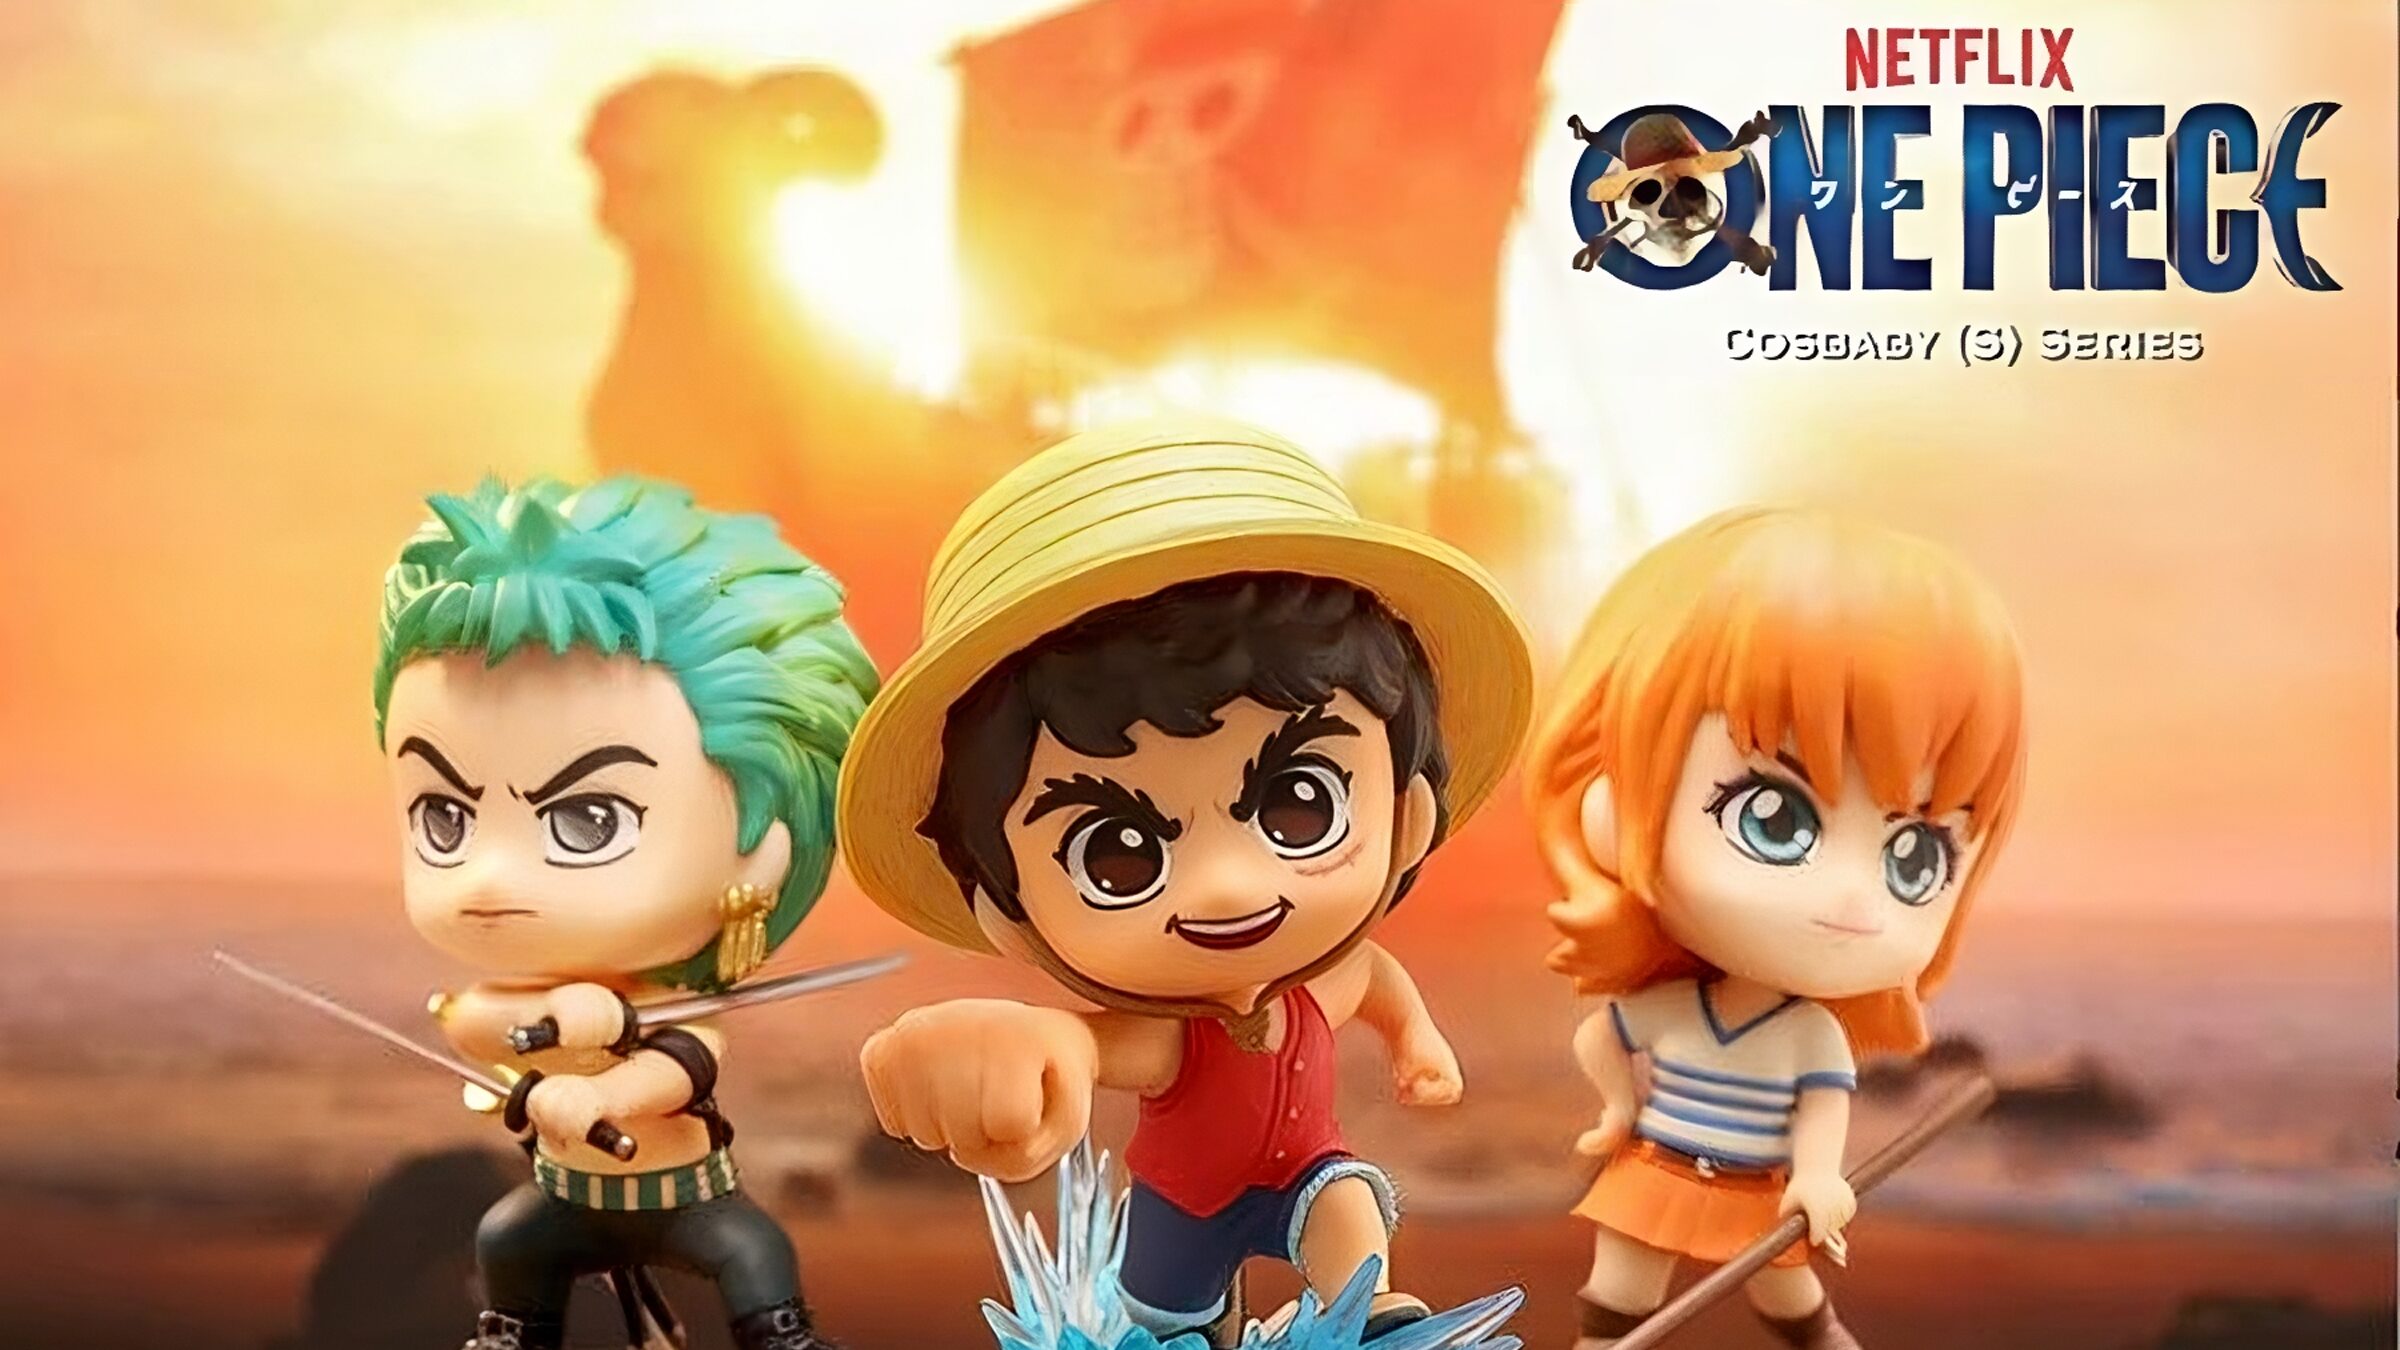 One Piece - Netflix: Hot Toys presenta le nuove figure "Cosbaby (S)" ispirate al live-action